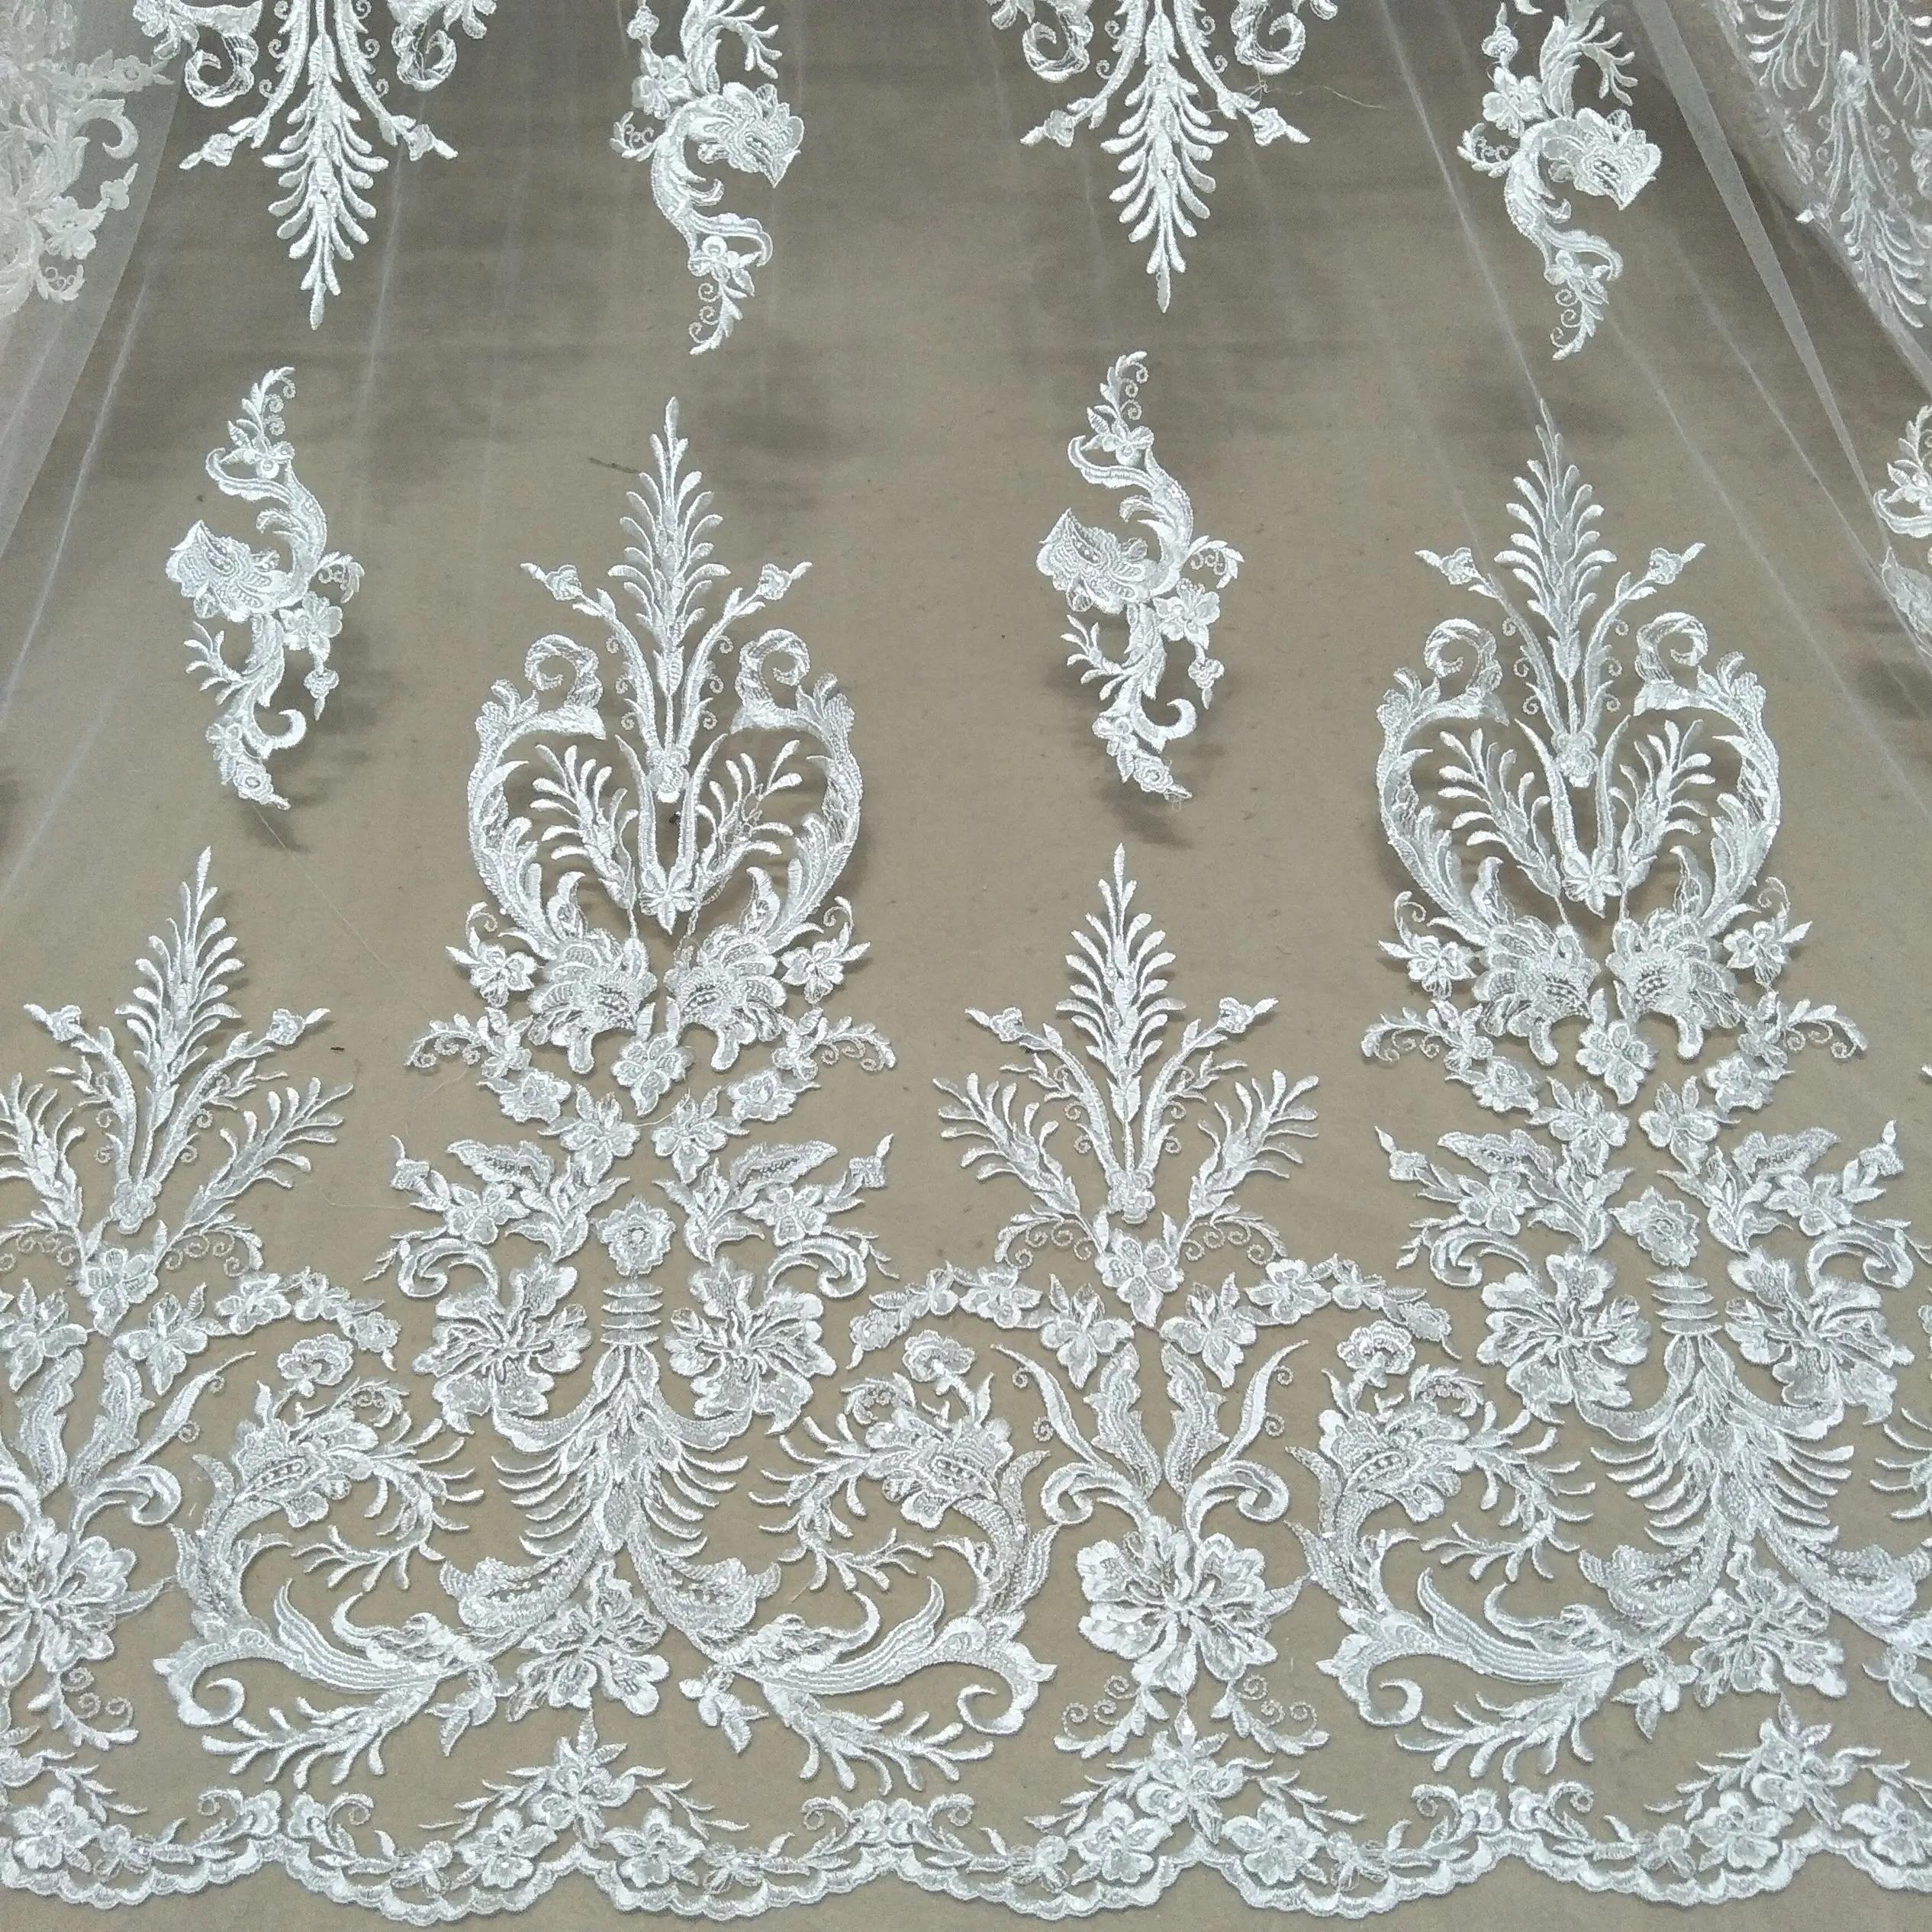 

new arrival bridal lace wedding gown dress lace fabric 130cm width ivory wedding gown dress lace sell by yard